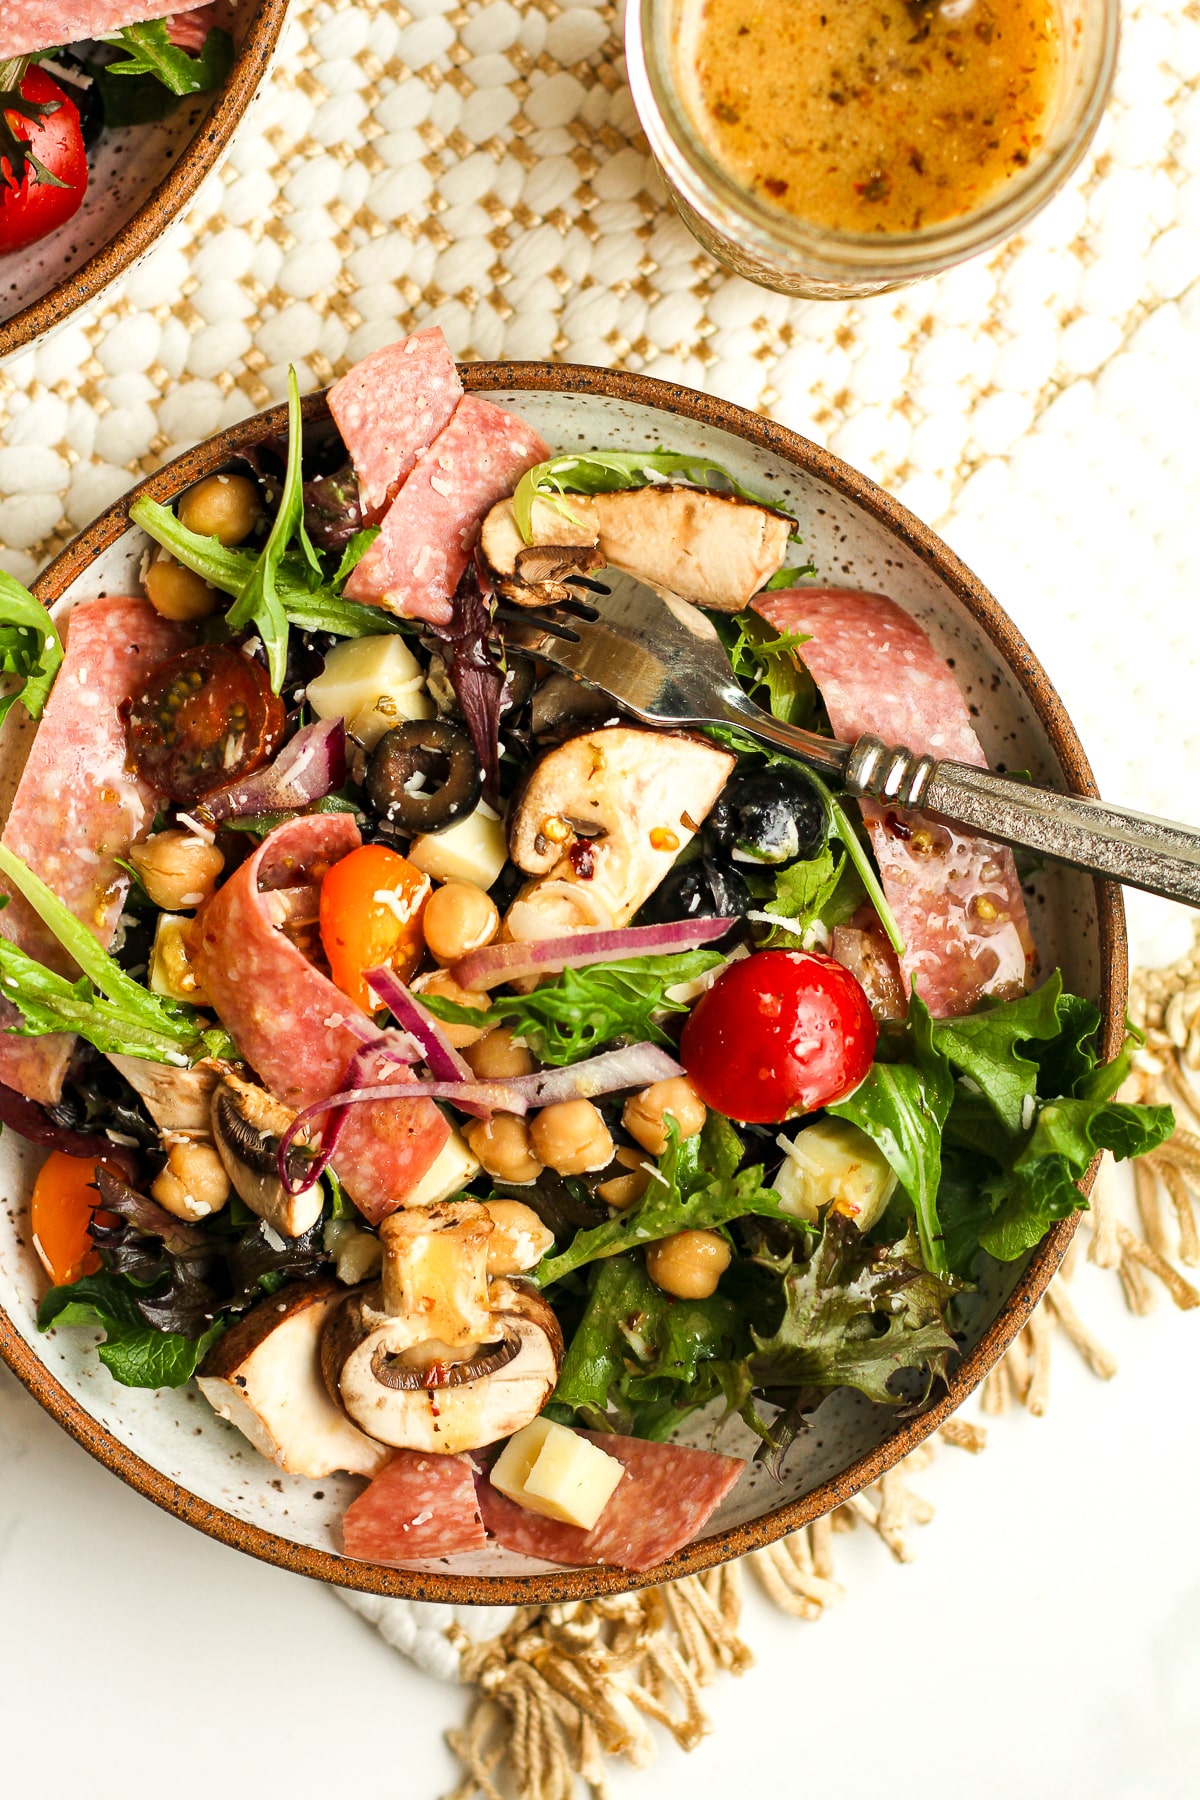 A serving of the antipasto salad with a fork.